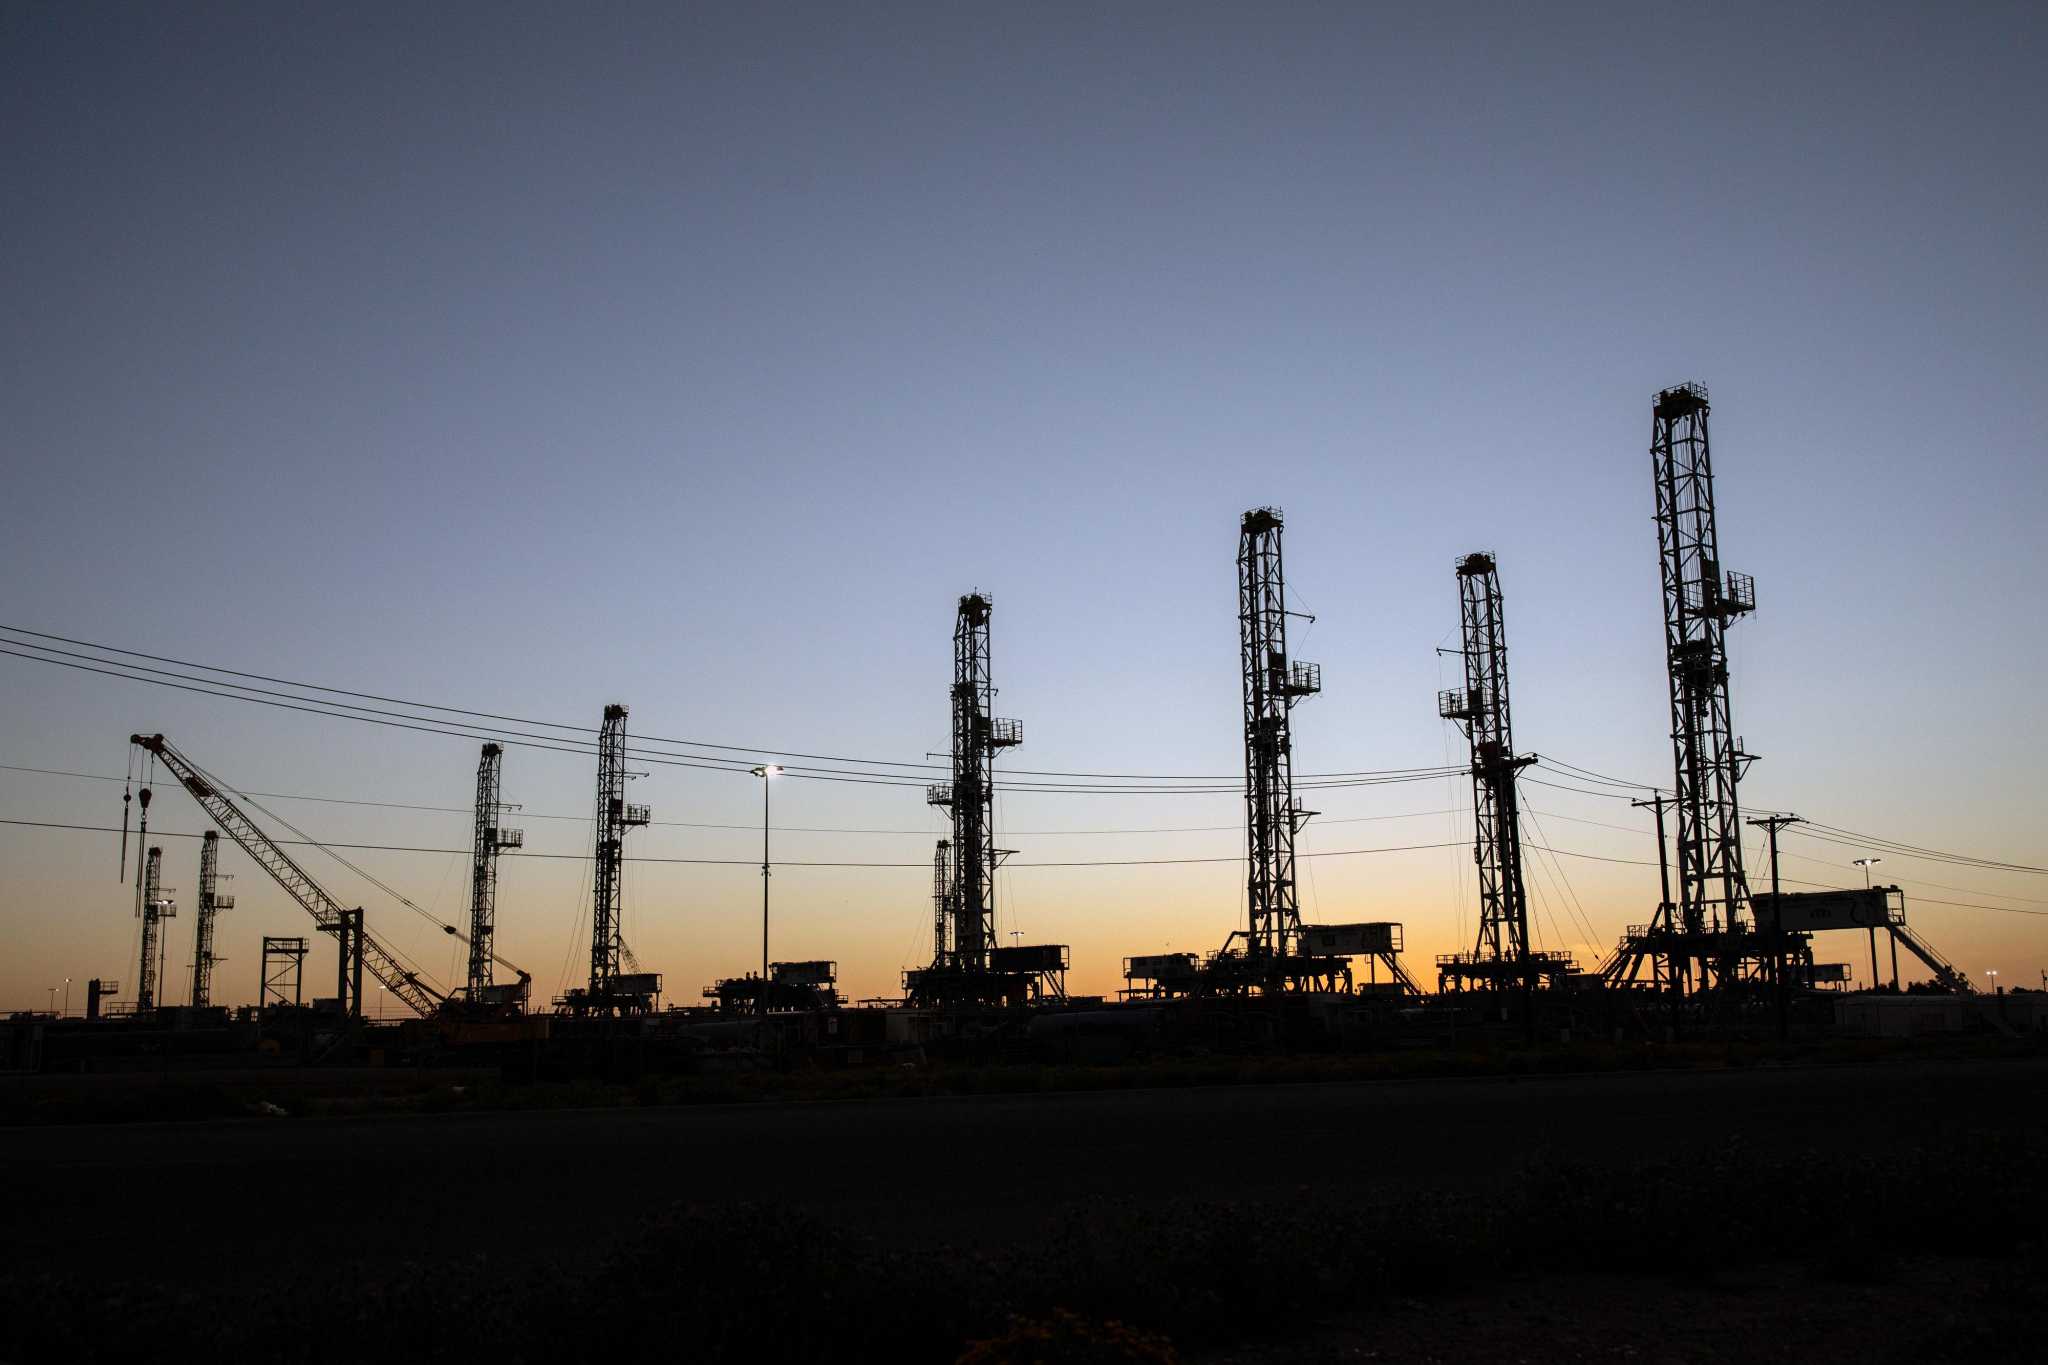 Oil and gas rig count may be bottoming out - Houston Chronicle